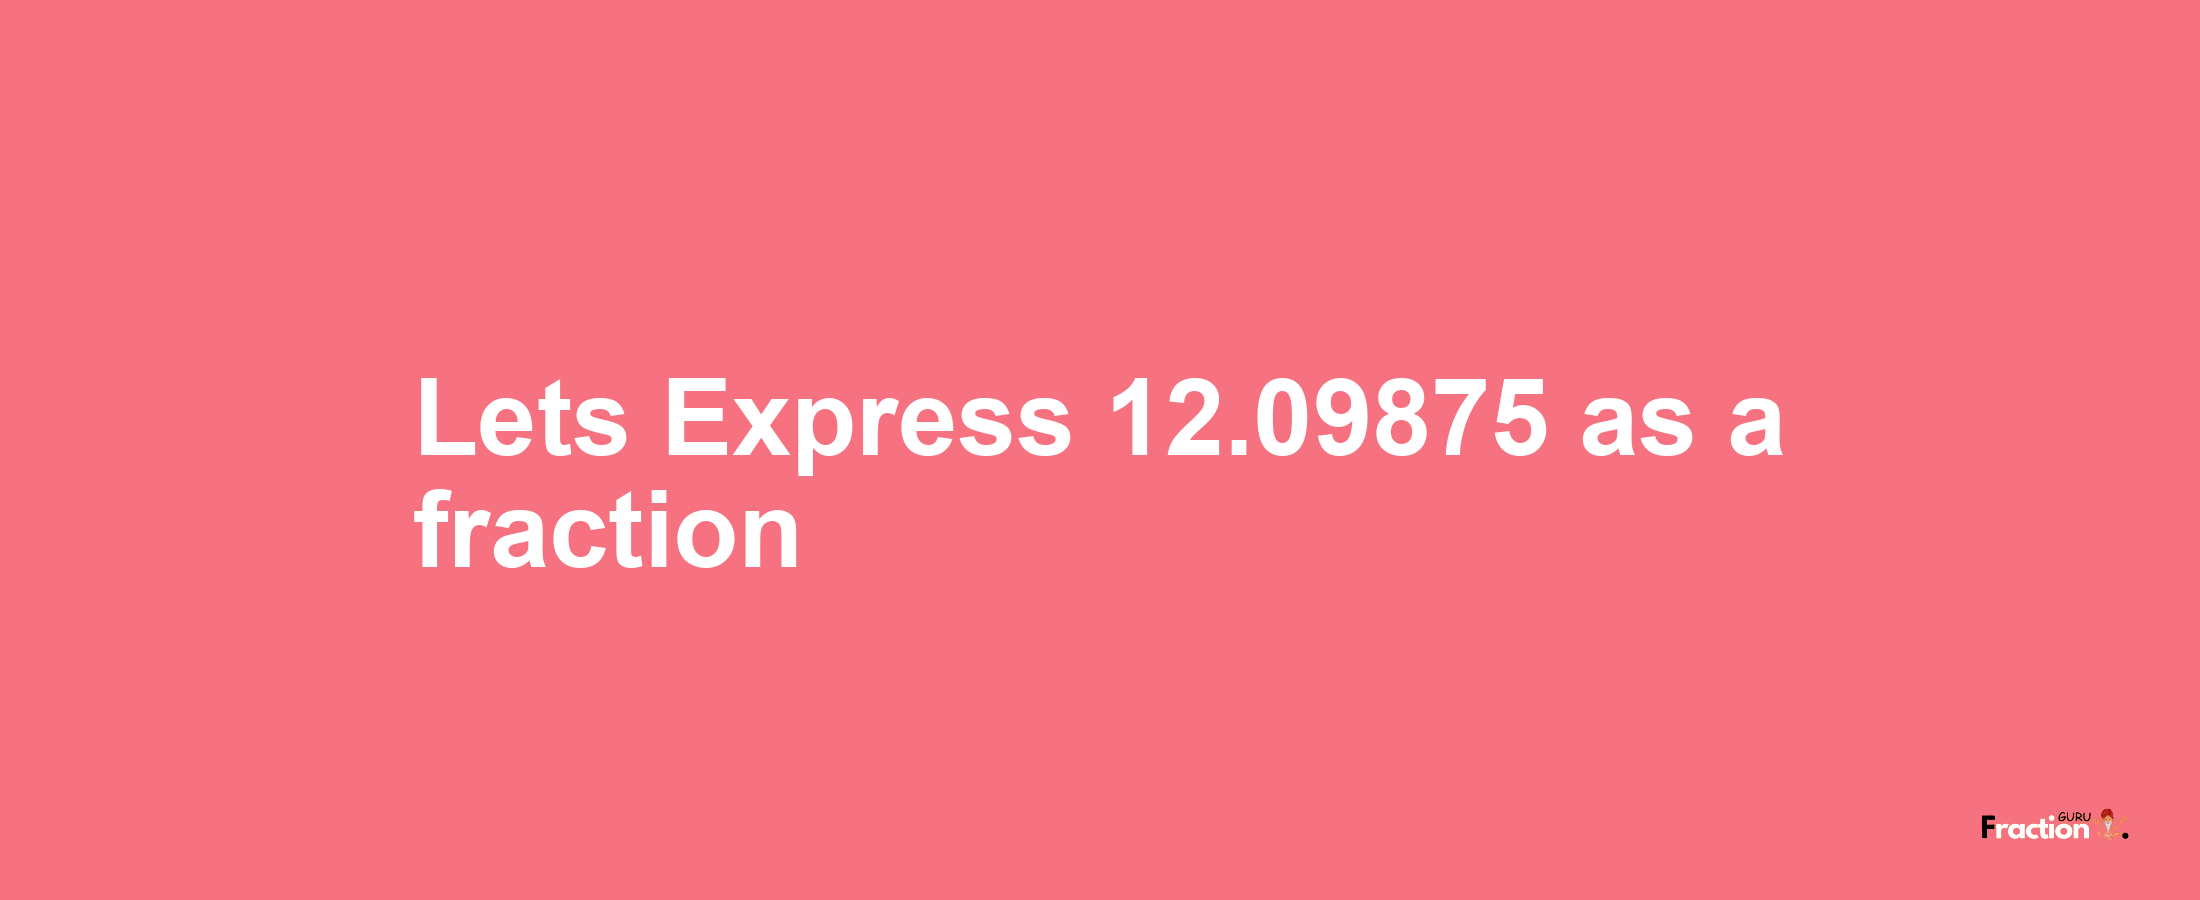 Lets Express 12.09875 as afraction